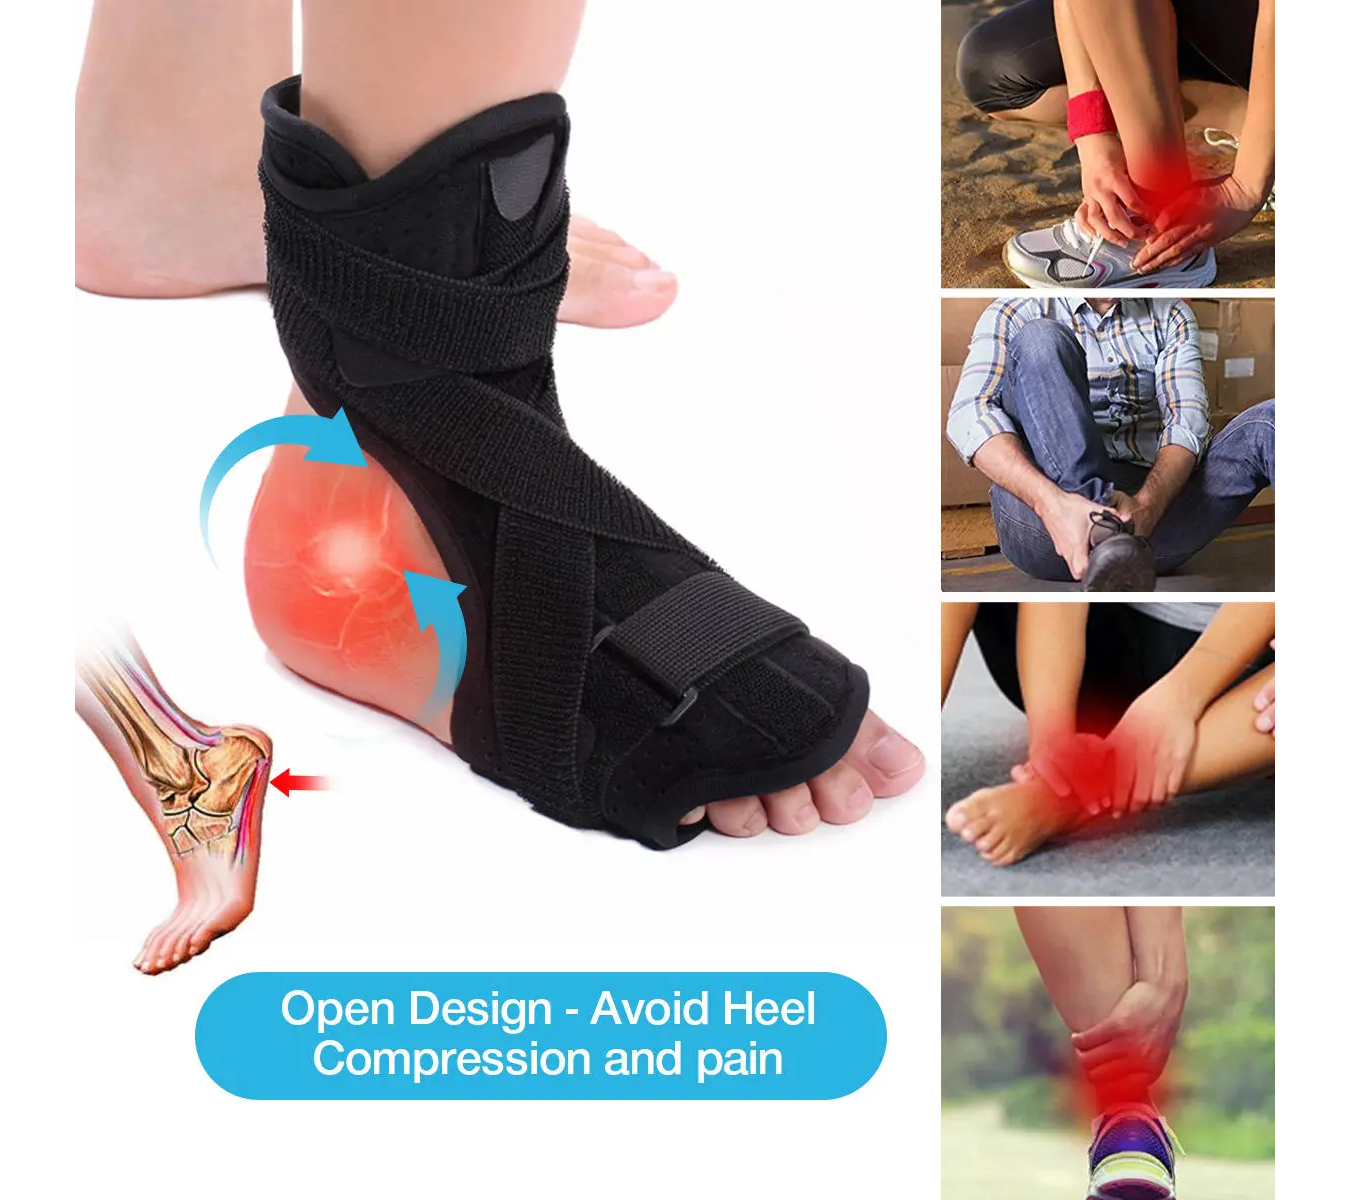 Will a Night Splint Help Your Plantar Fasciitis? We Review 3 Braces. 